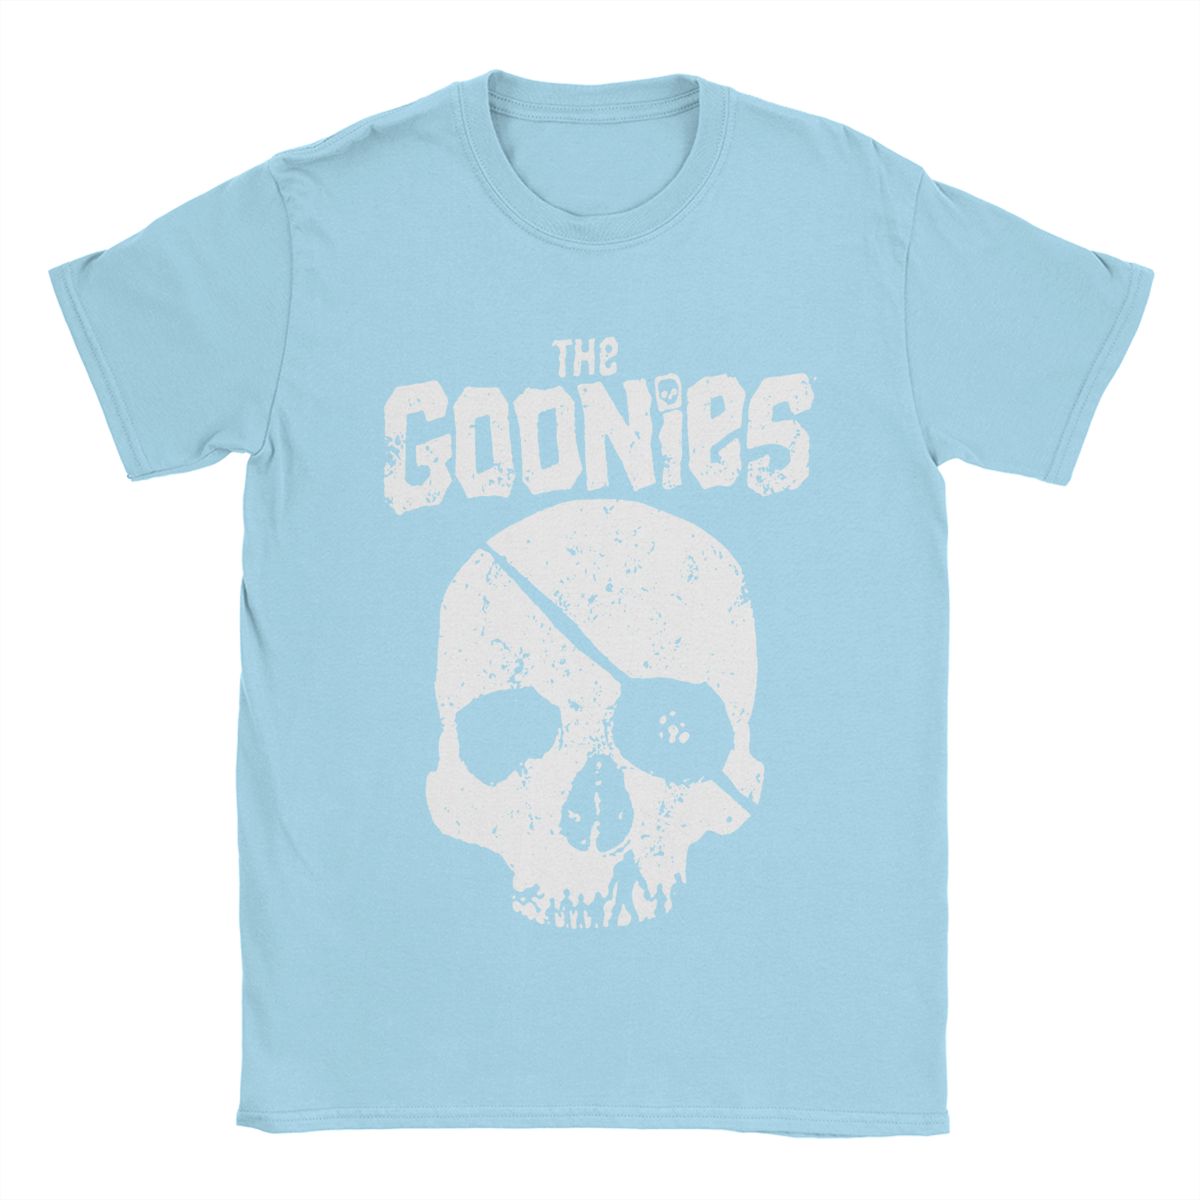 The Goonies - Classic 80s - Cult Childrens Movie - Vintage Film Lover T-Shirt-Sky Blue-S-